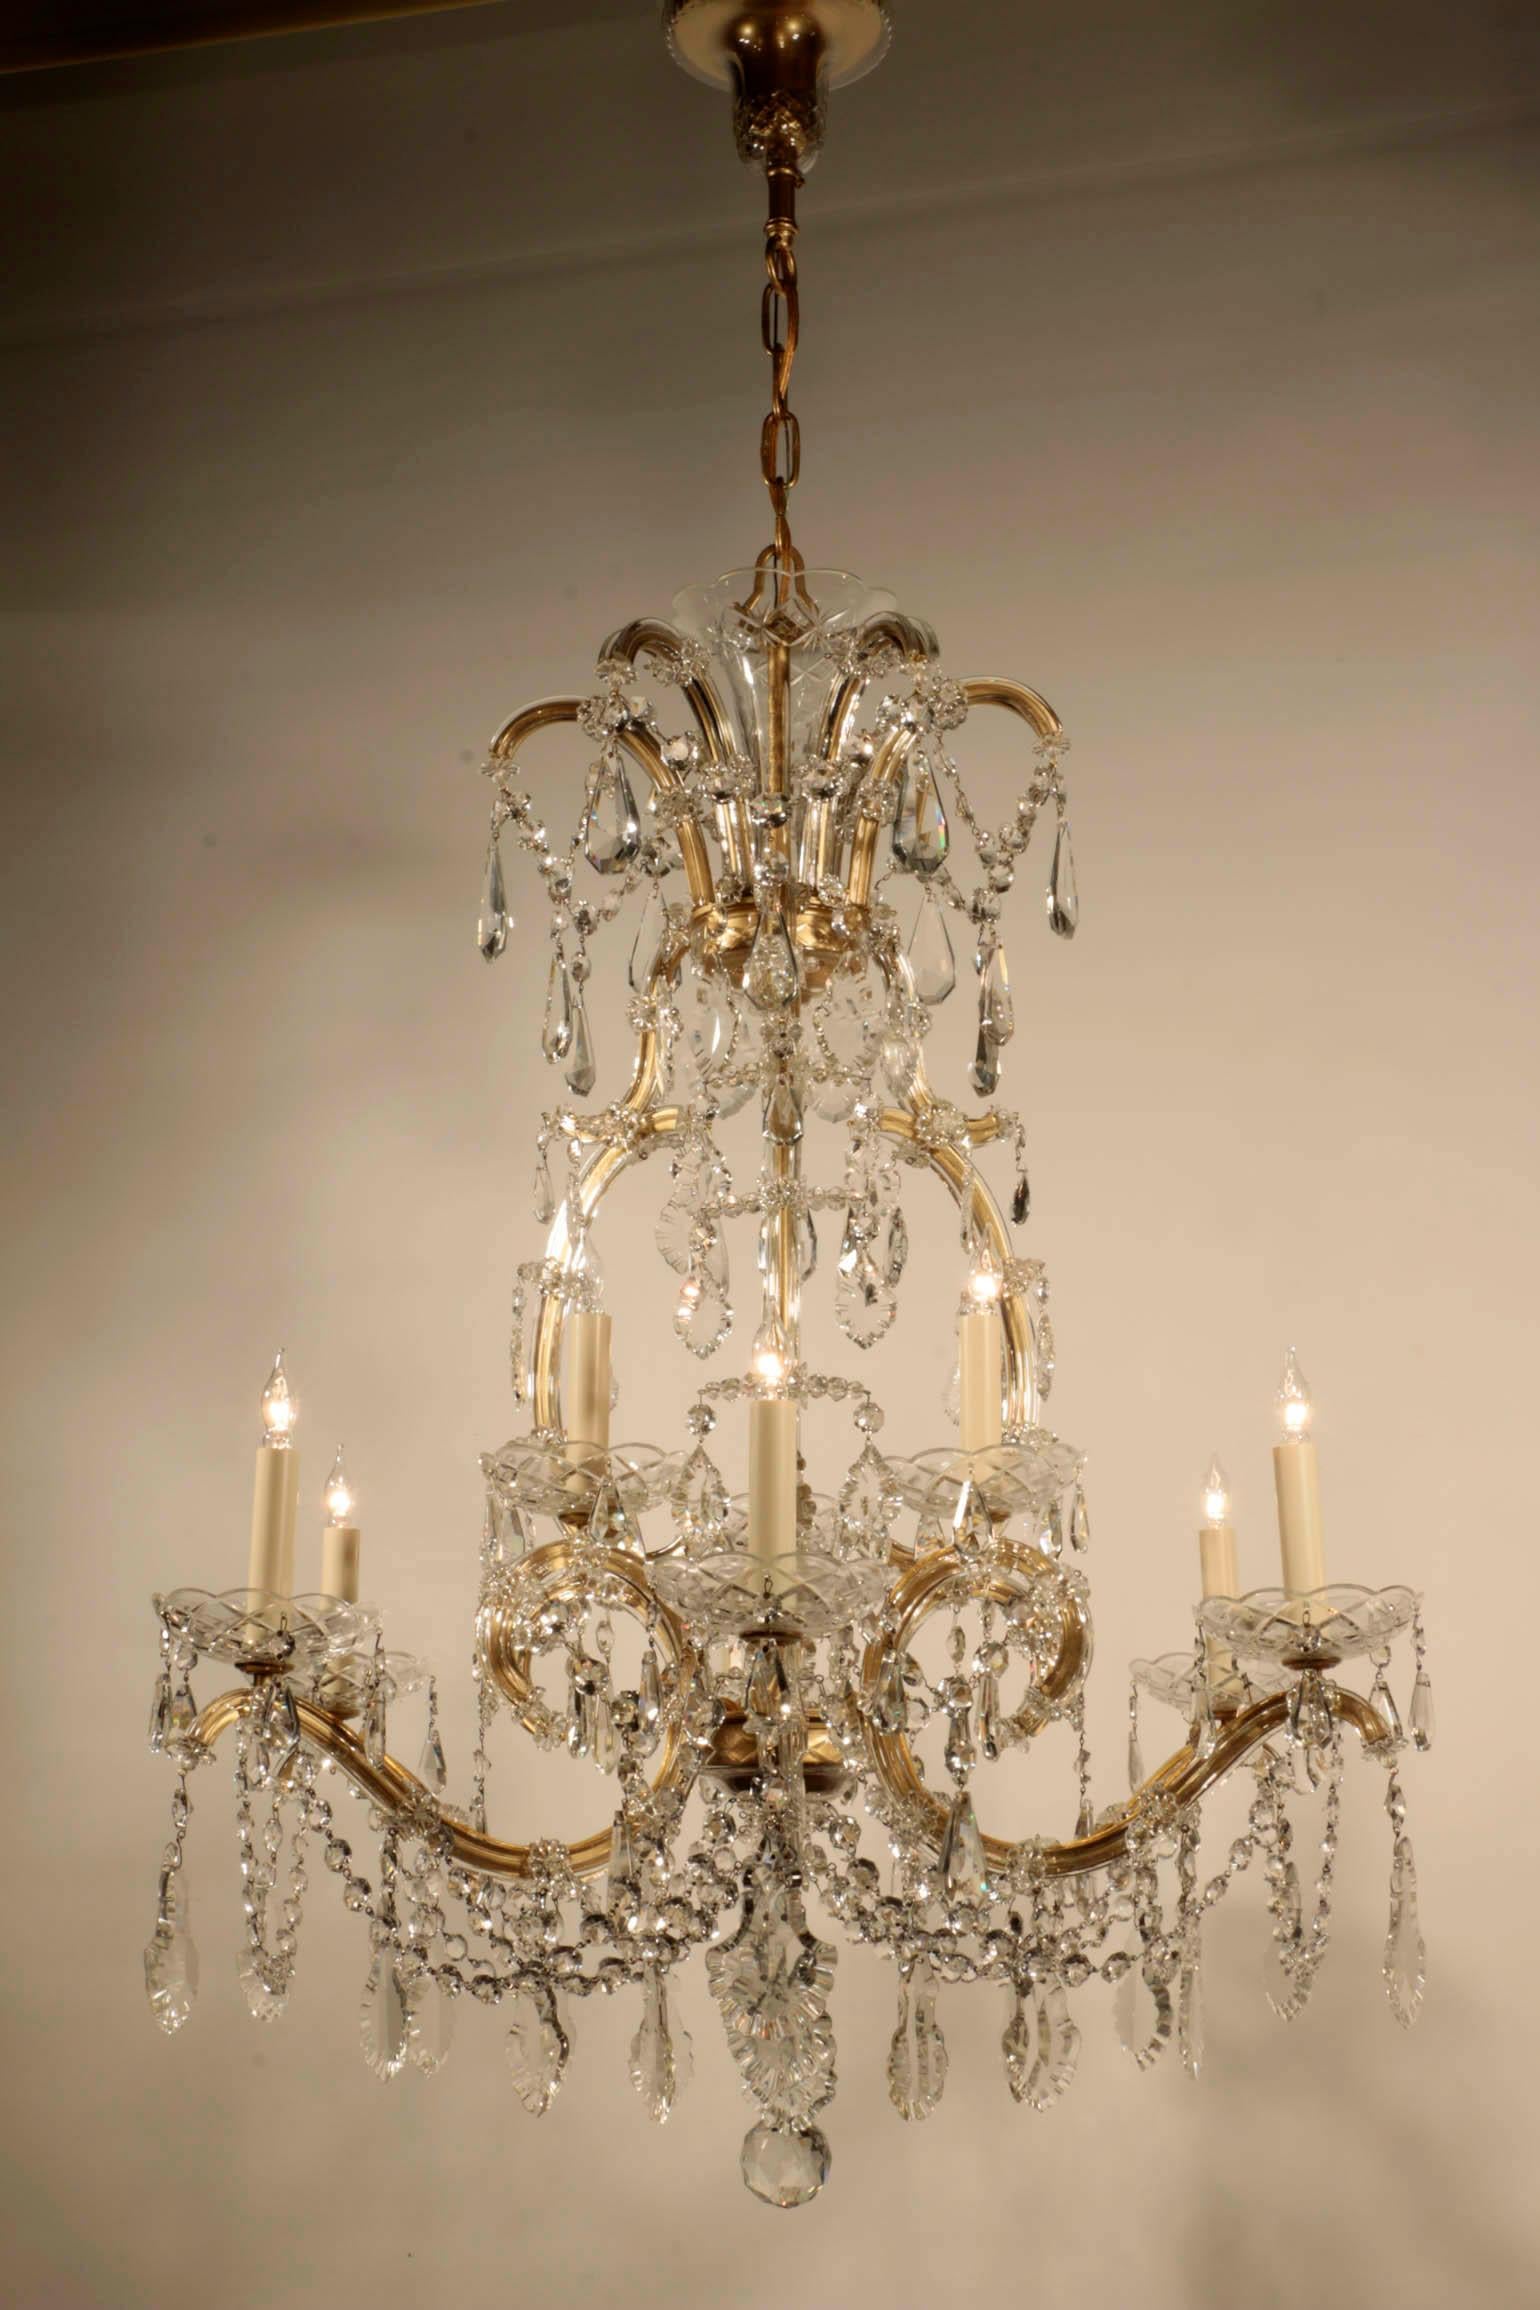 A vintage Czechoslovakian Marie-Therese cut crystal chandelier. The upper tier with three lights, the lower tier six, the whole profusely hung with drops, hanging beads and French style pendaloques crystals.
This wonderful fixture illuminates itself